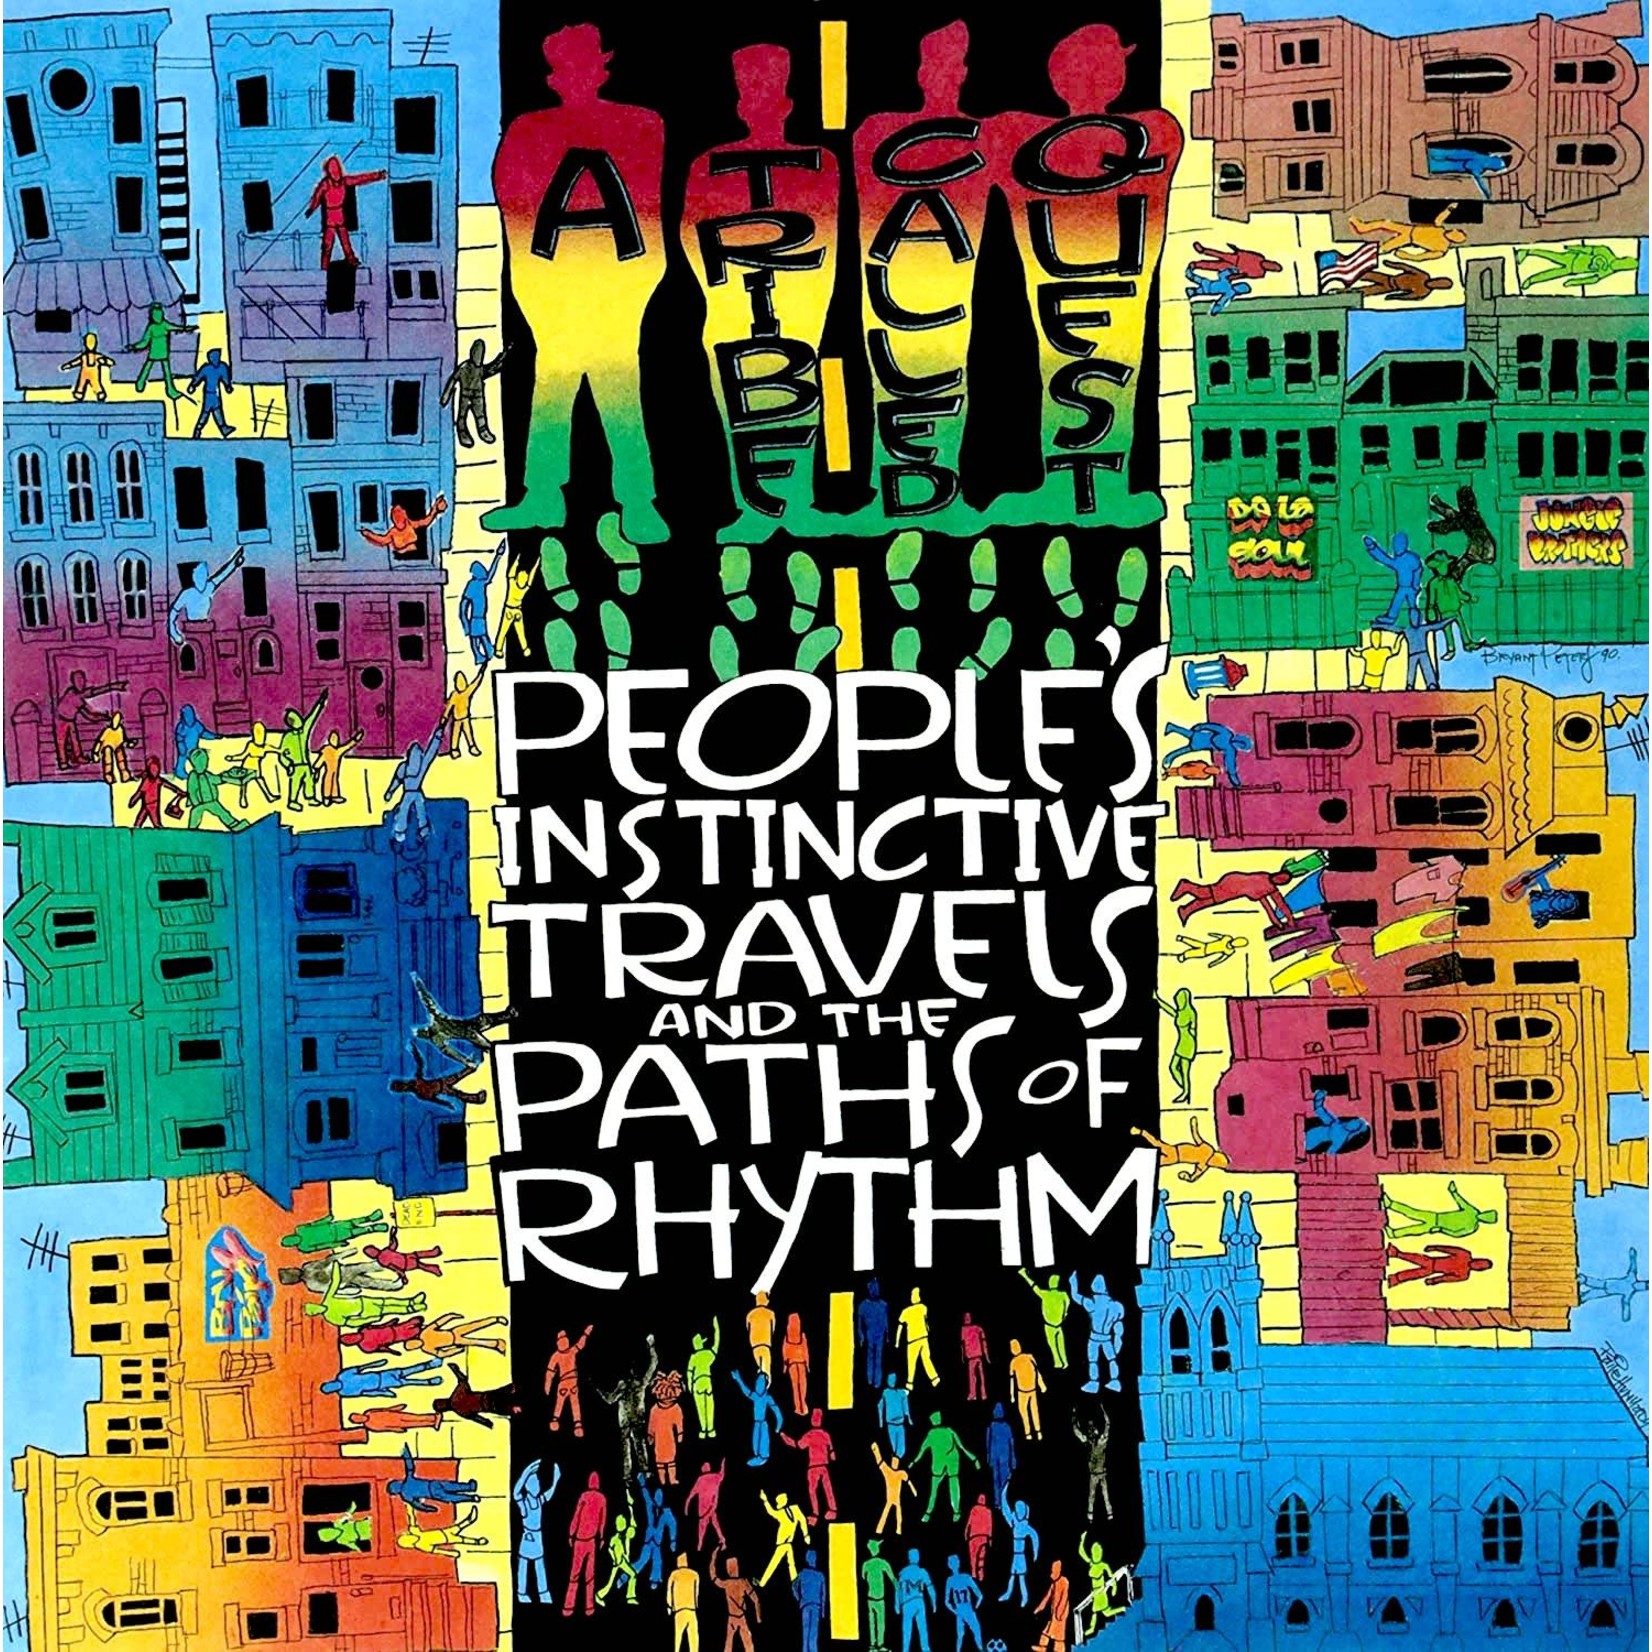 [New] A Tribe Called Quest - People's Instinctive Travels & the Paths of Rhythm (2LP)